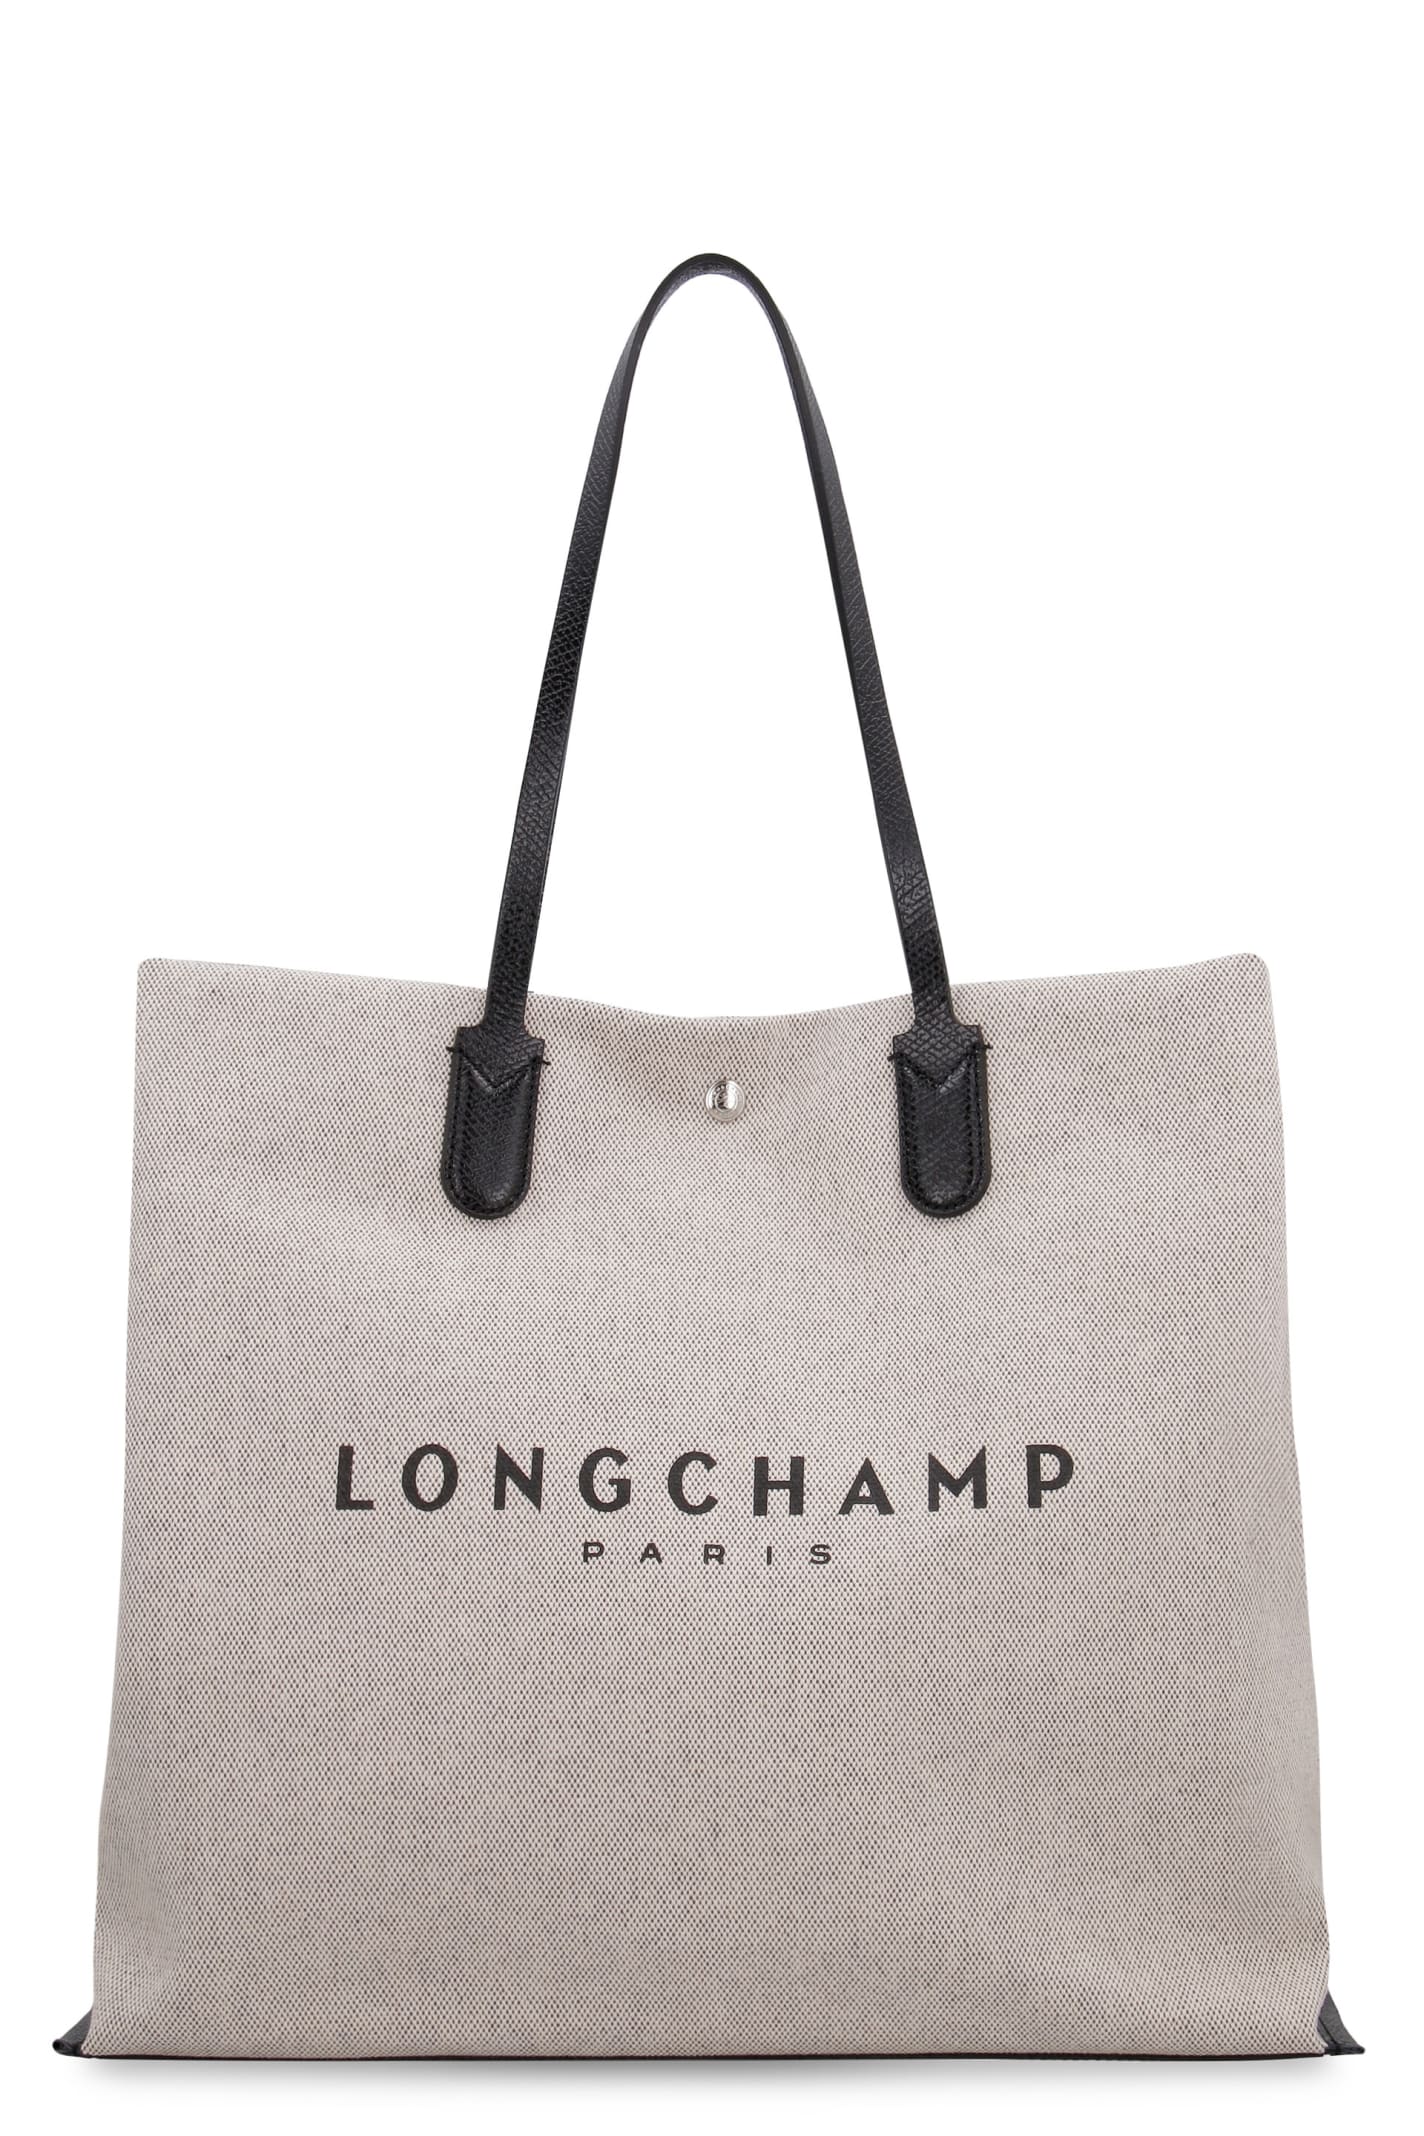 LONGCHAMP ESSENTIAL TOILE CANVAS TOTE + WHAT'S IN MY TRAVEL BAG